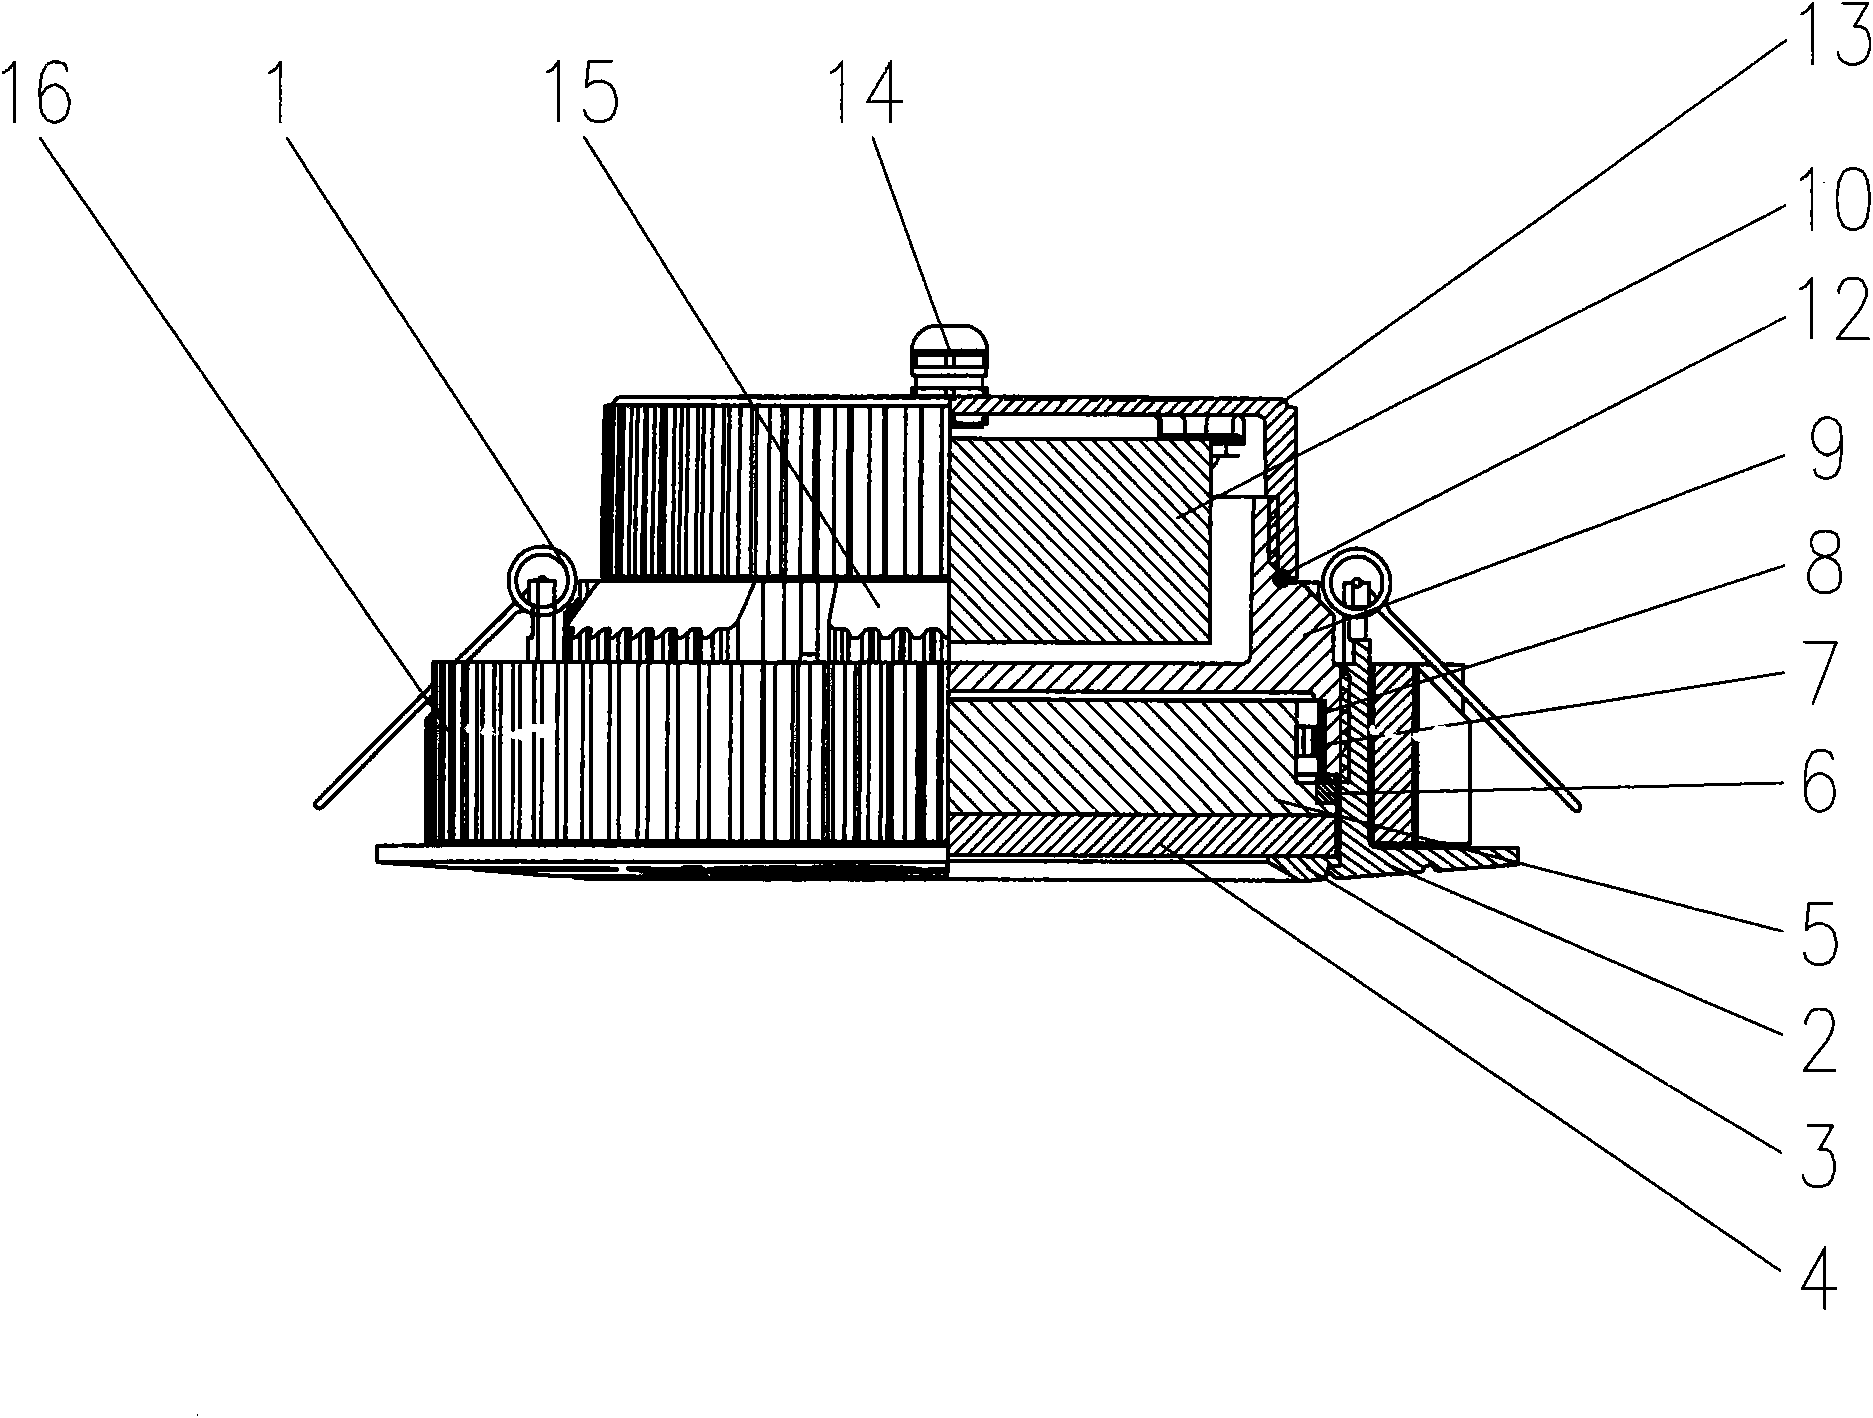 Light conduction plane lamp with built-in power